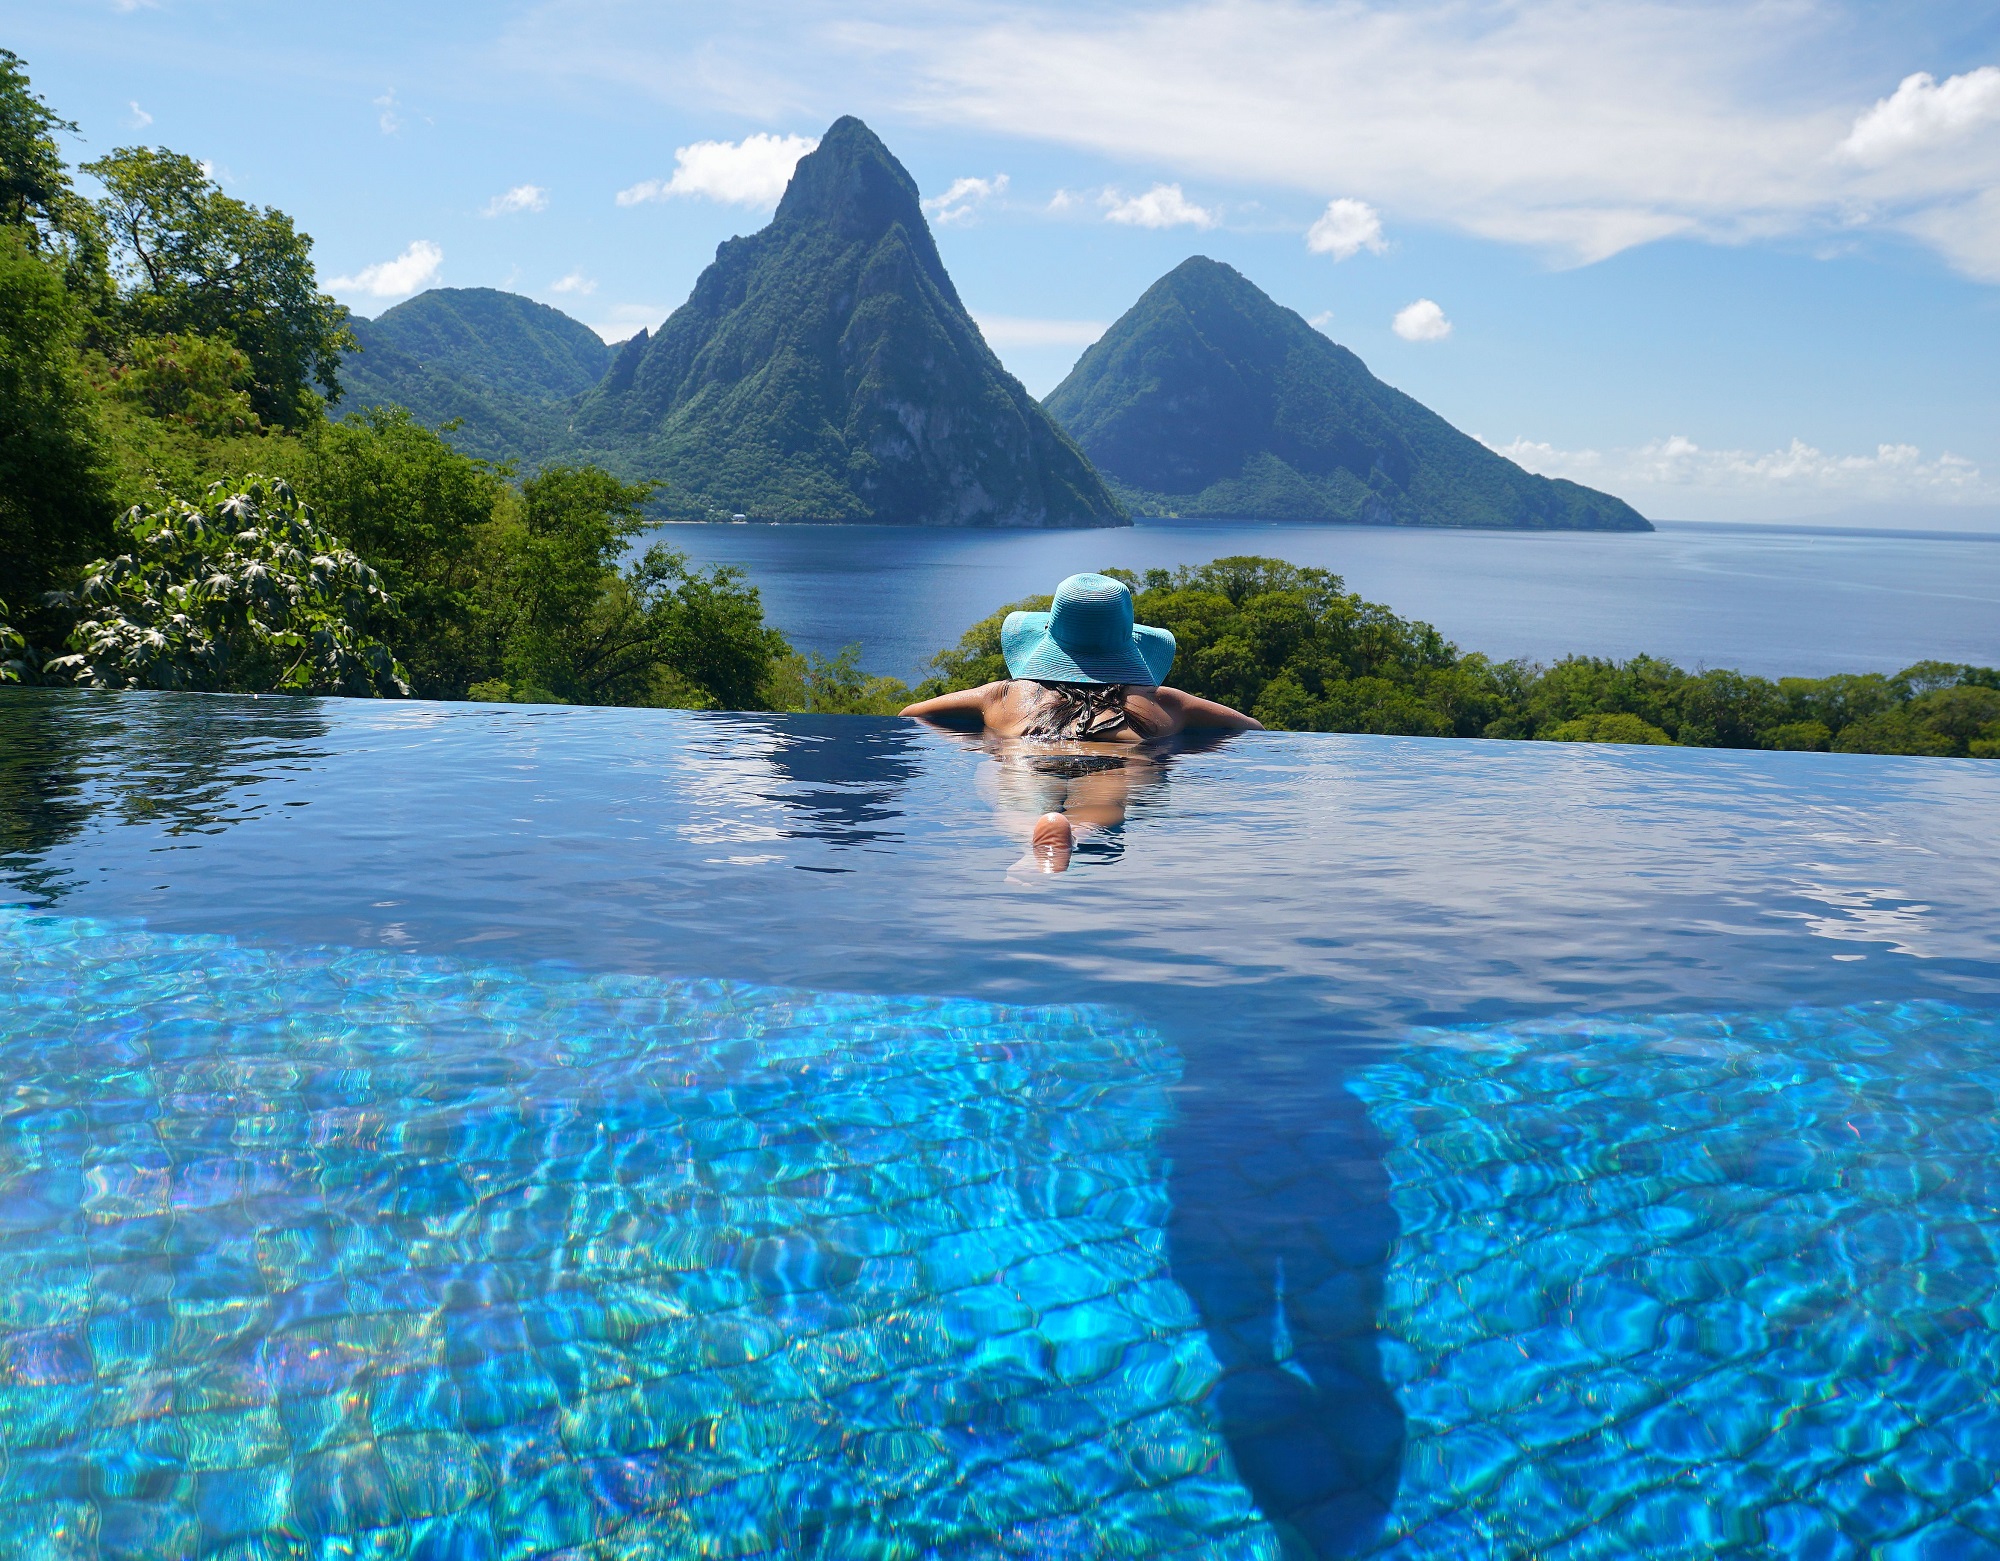 Jade Mountain Resort Re-Opens with Enticing 2021 Promotions